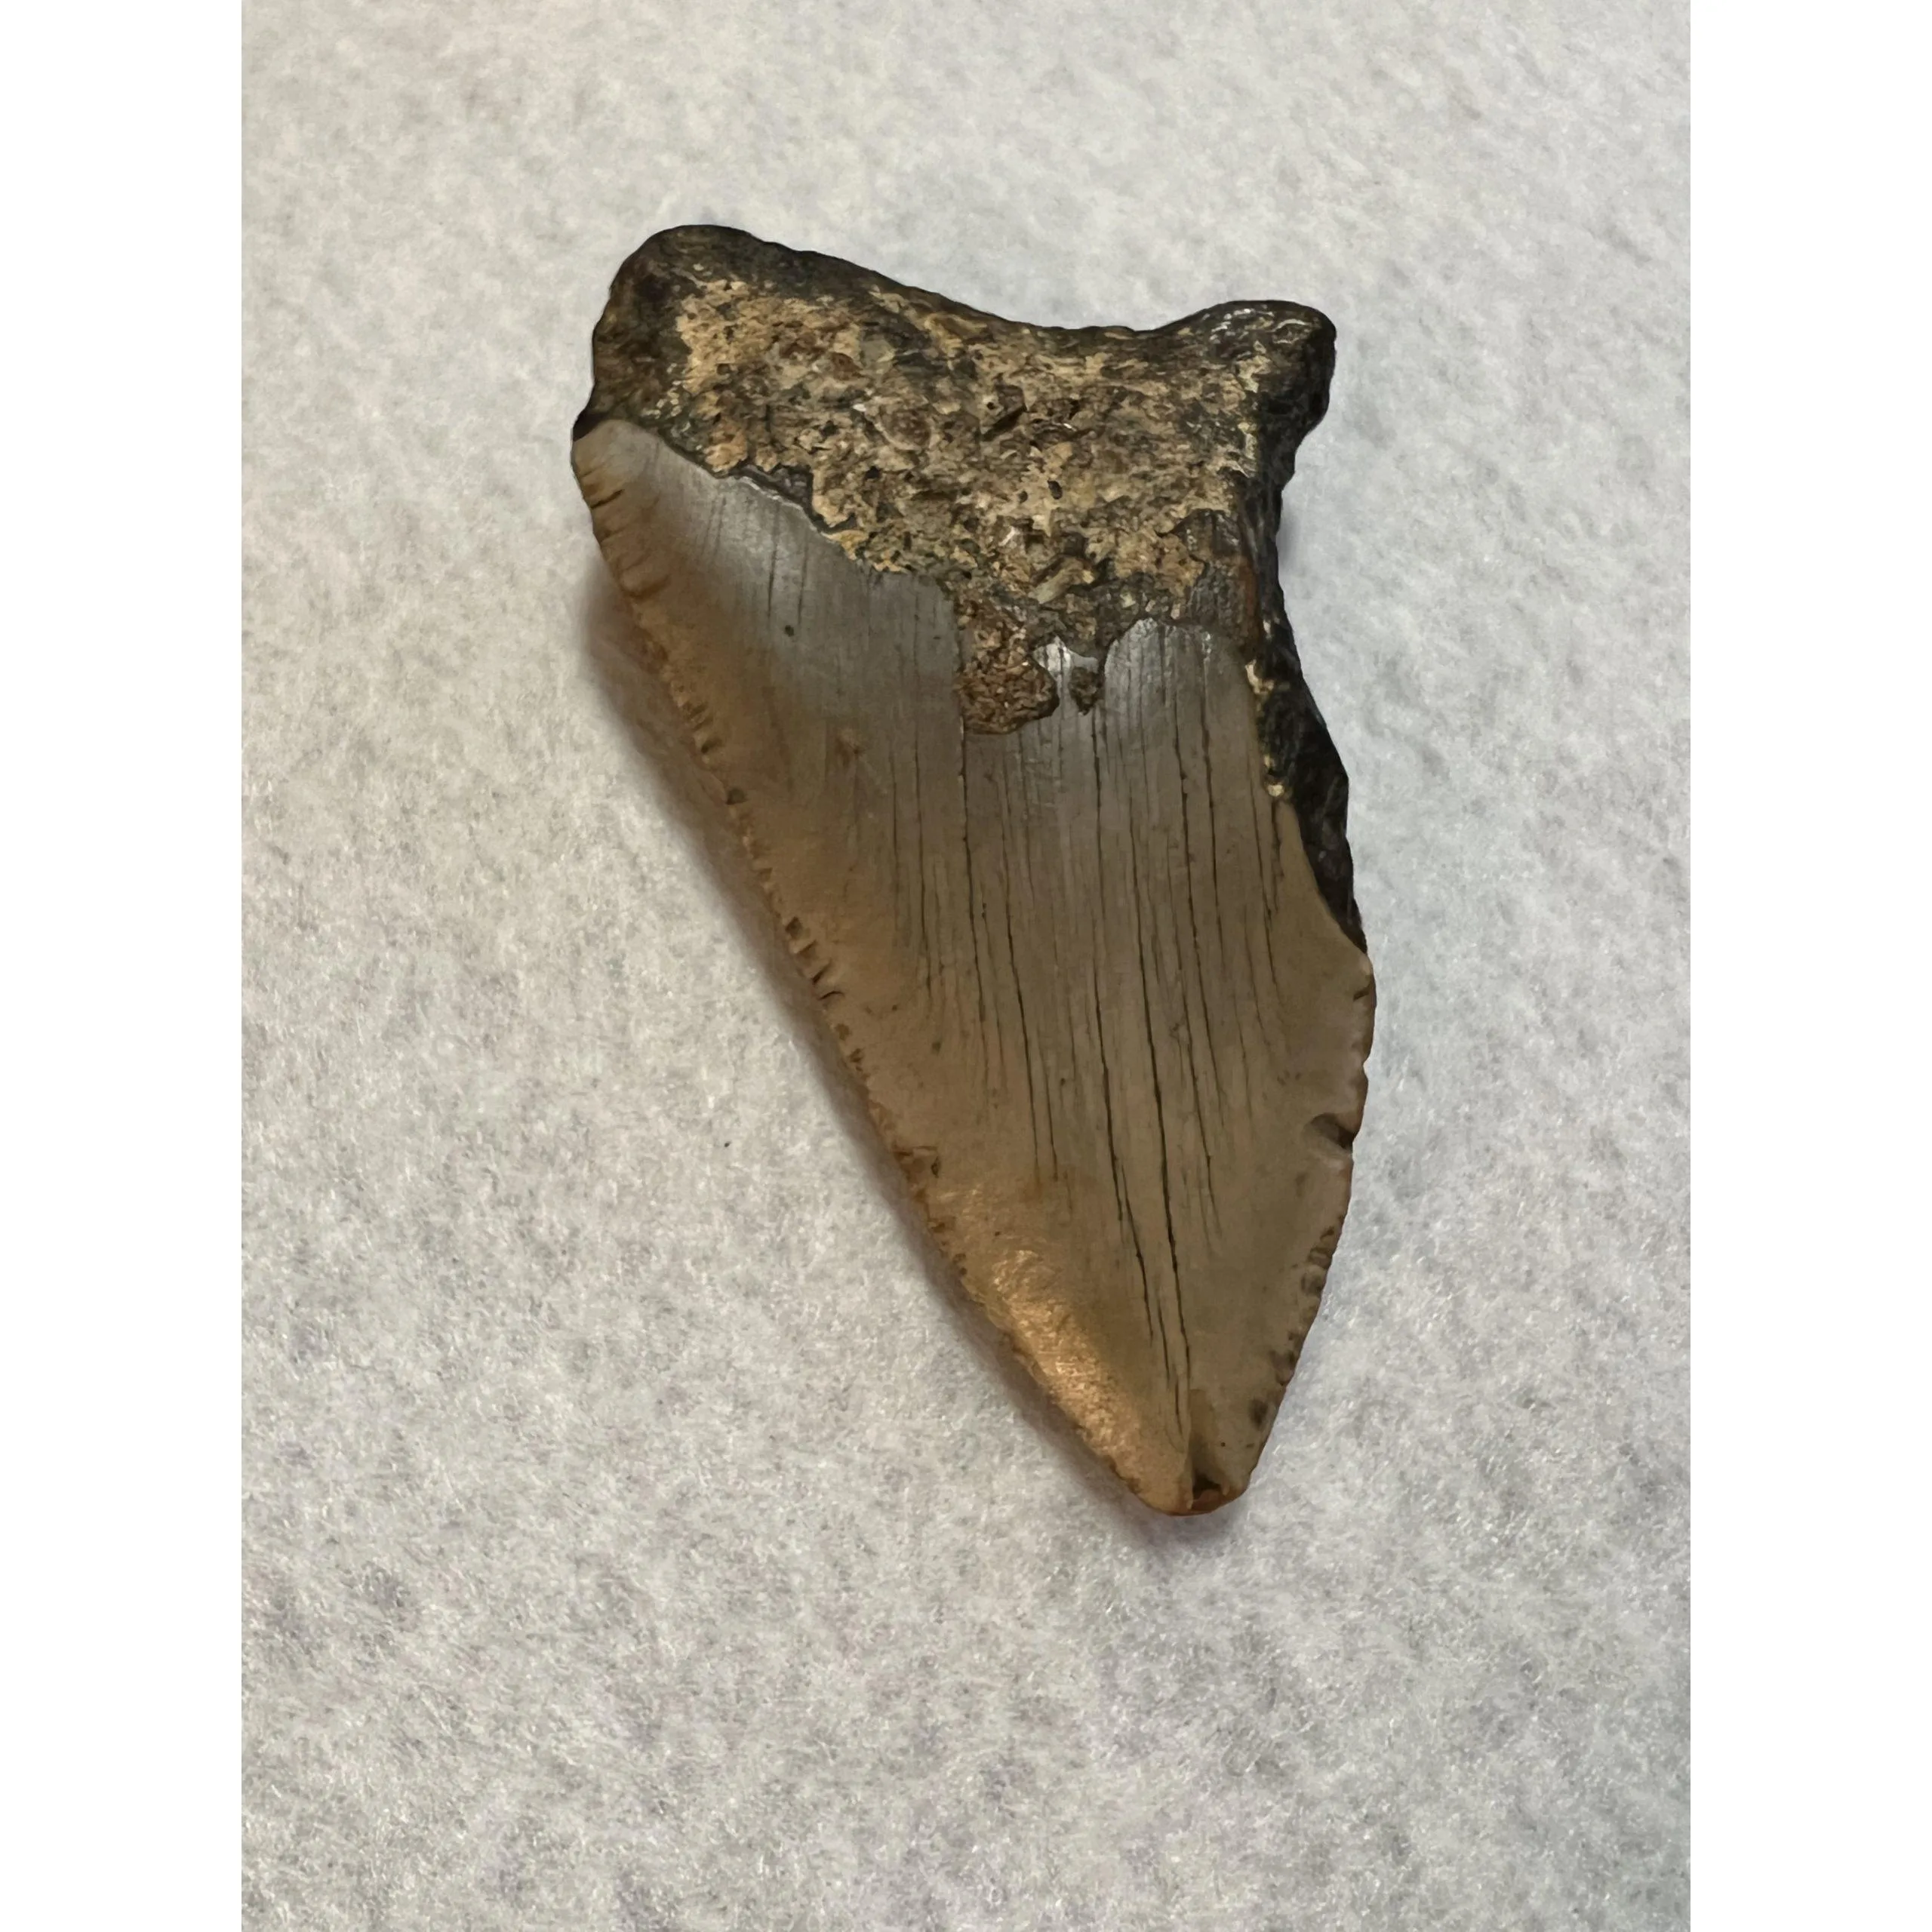 Megalodon Partial Tooth  South Carolina 4.50 inch Prehistoric Online